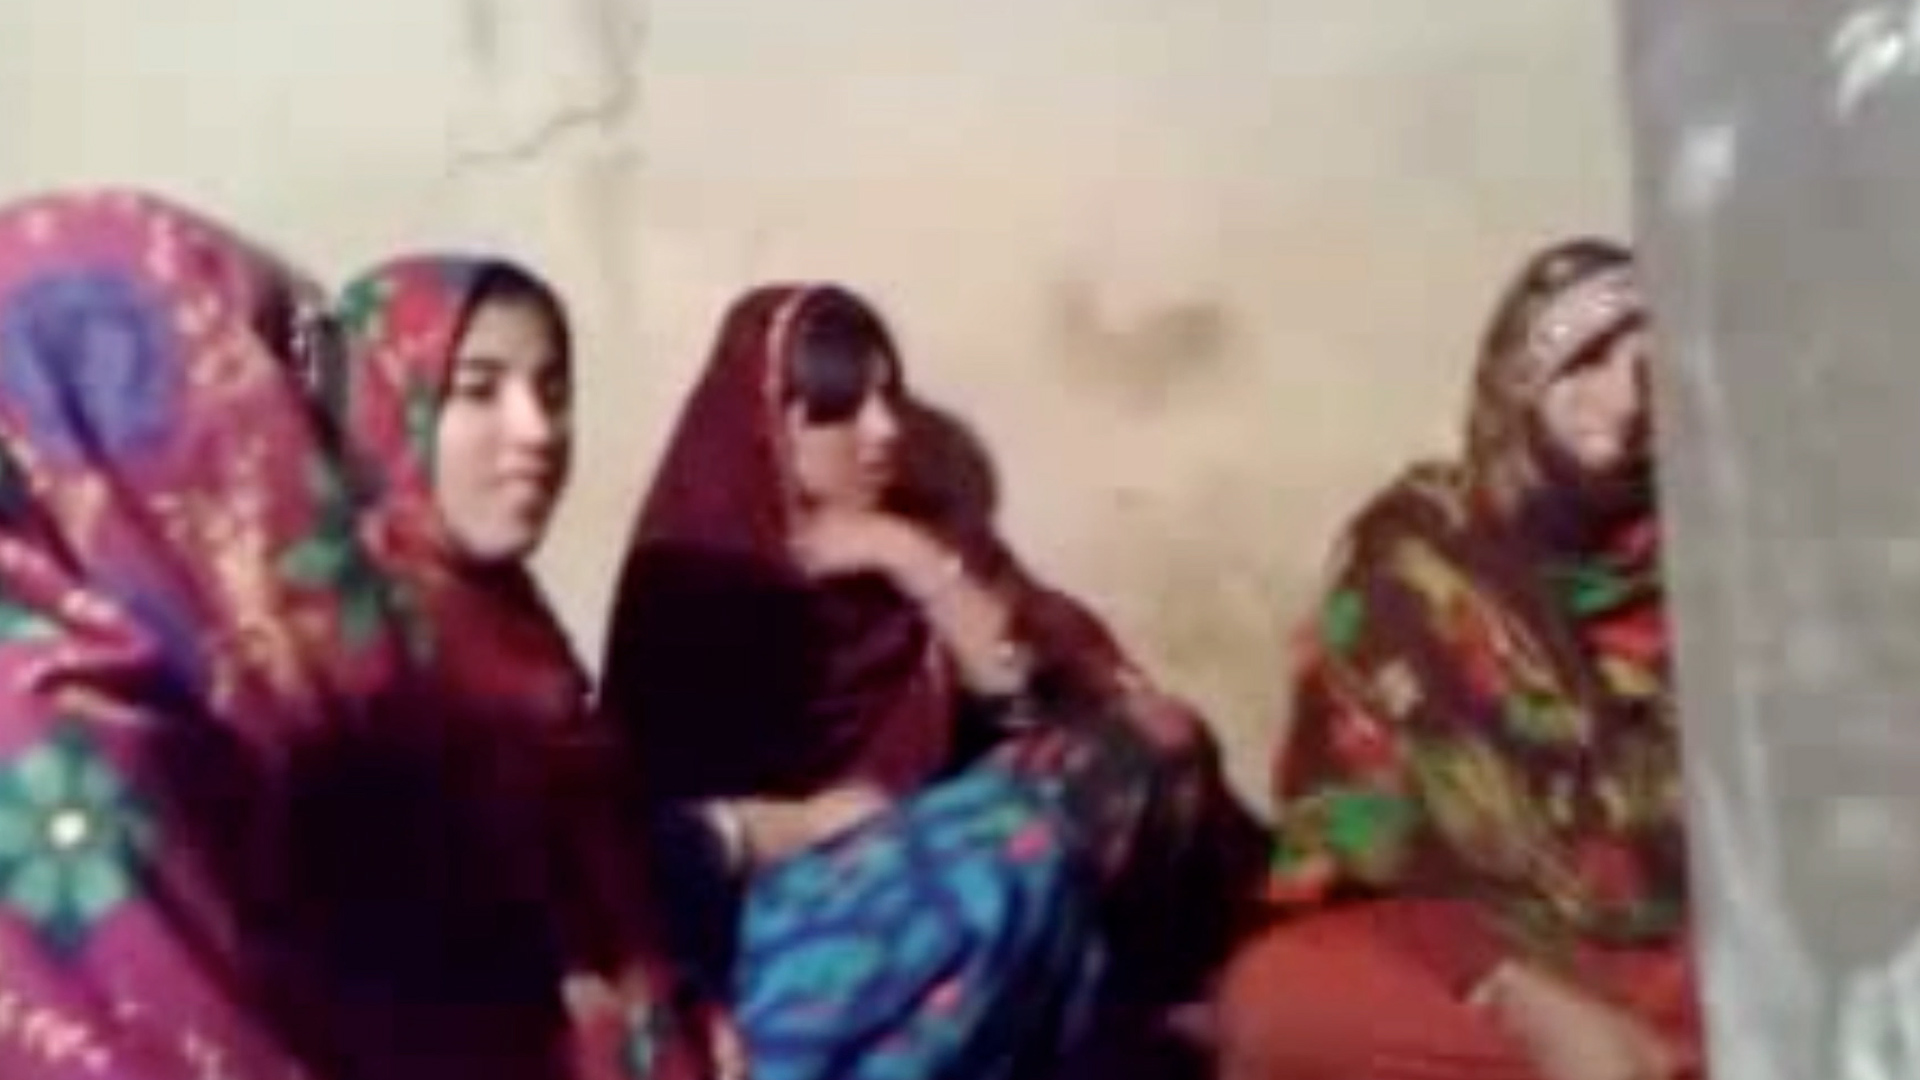 1920px x 1080px - Video shows five Pakistani women laughing, clapping to music before  disappearance - The Washington Post